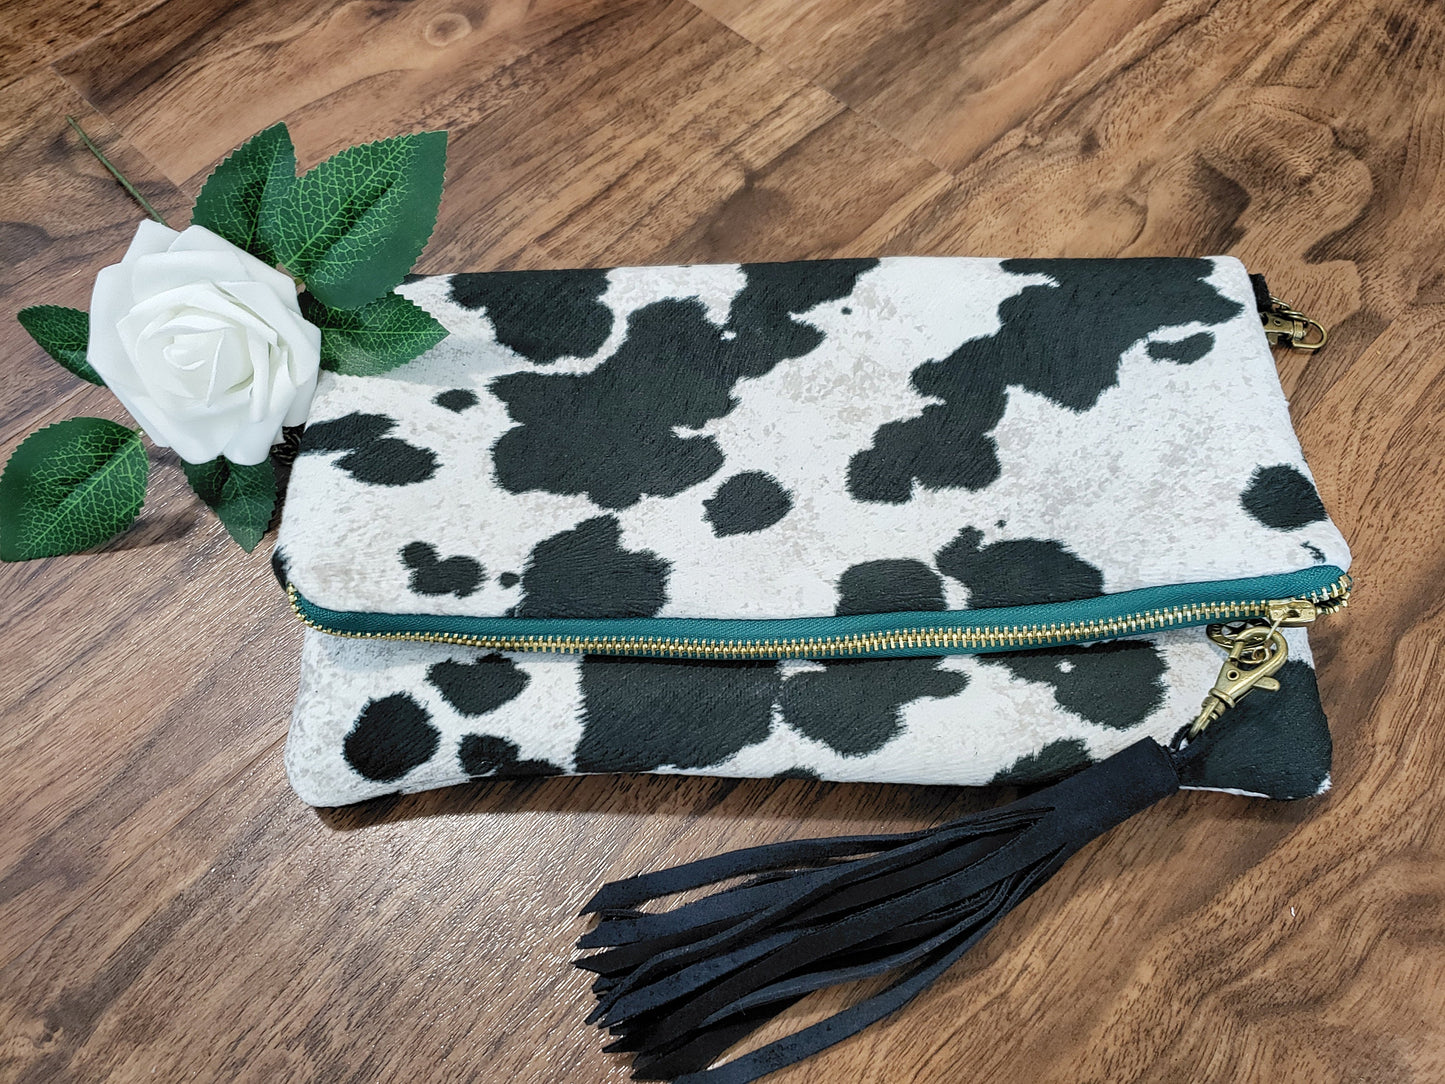 Cowhide Suede foldover clutch purse, cow print, gift for her,  Christmas, bridesmaid gift, Ankara lining, inside pocket, silver chain strap